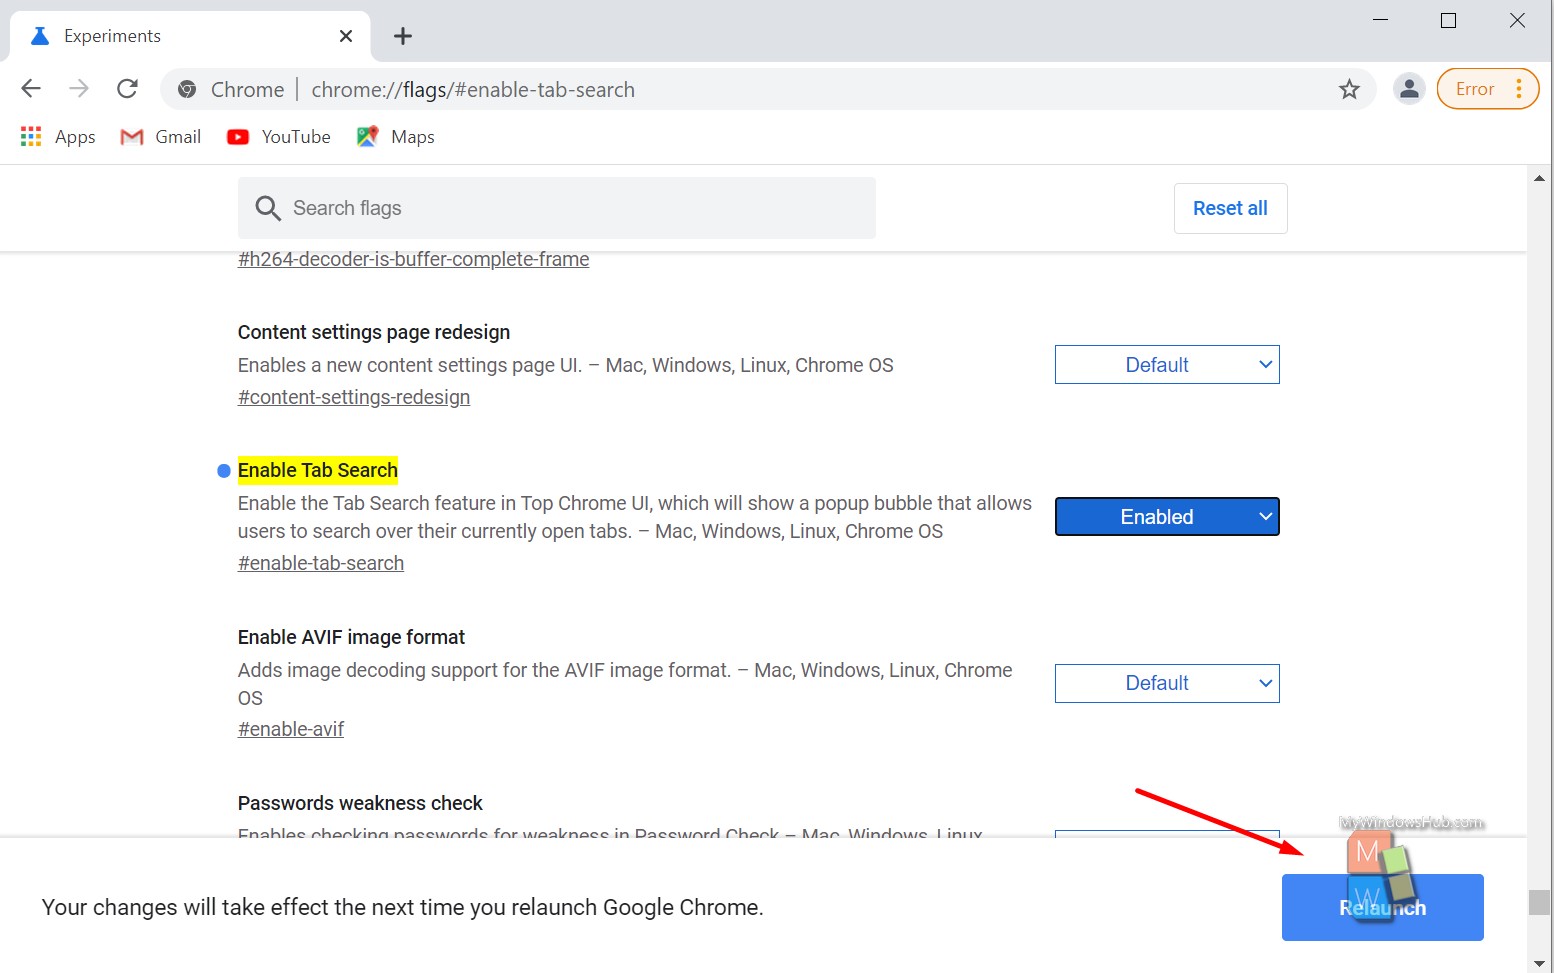 How To Enable The Tab Search Feature In Google Chrome?